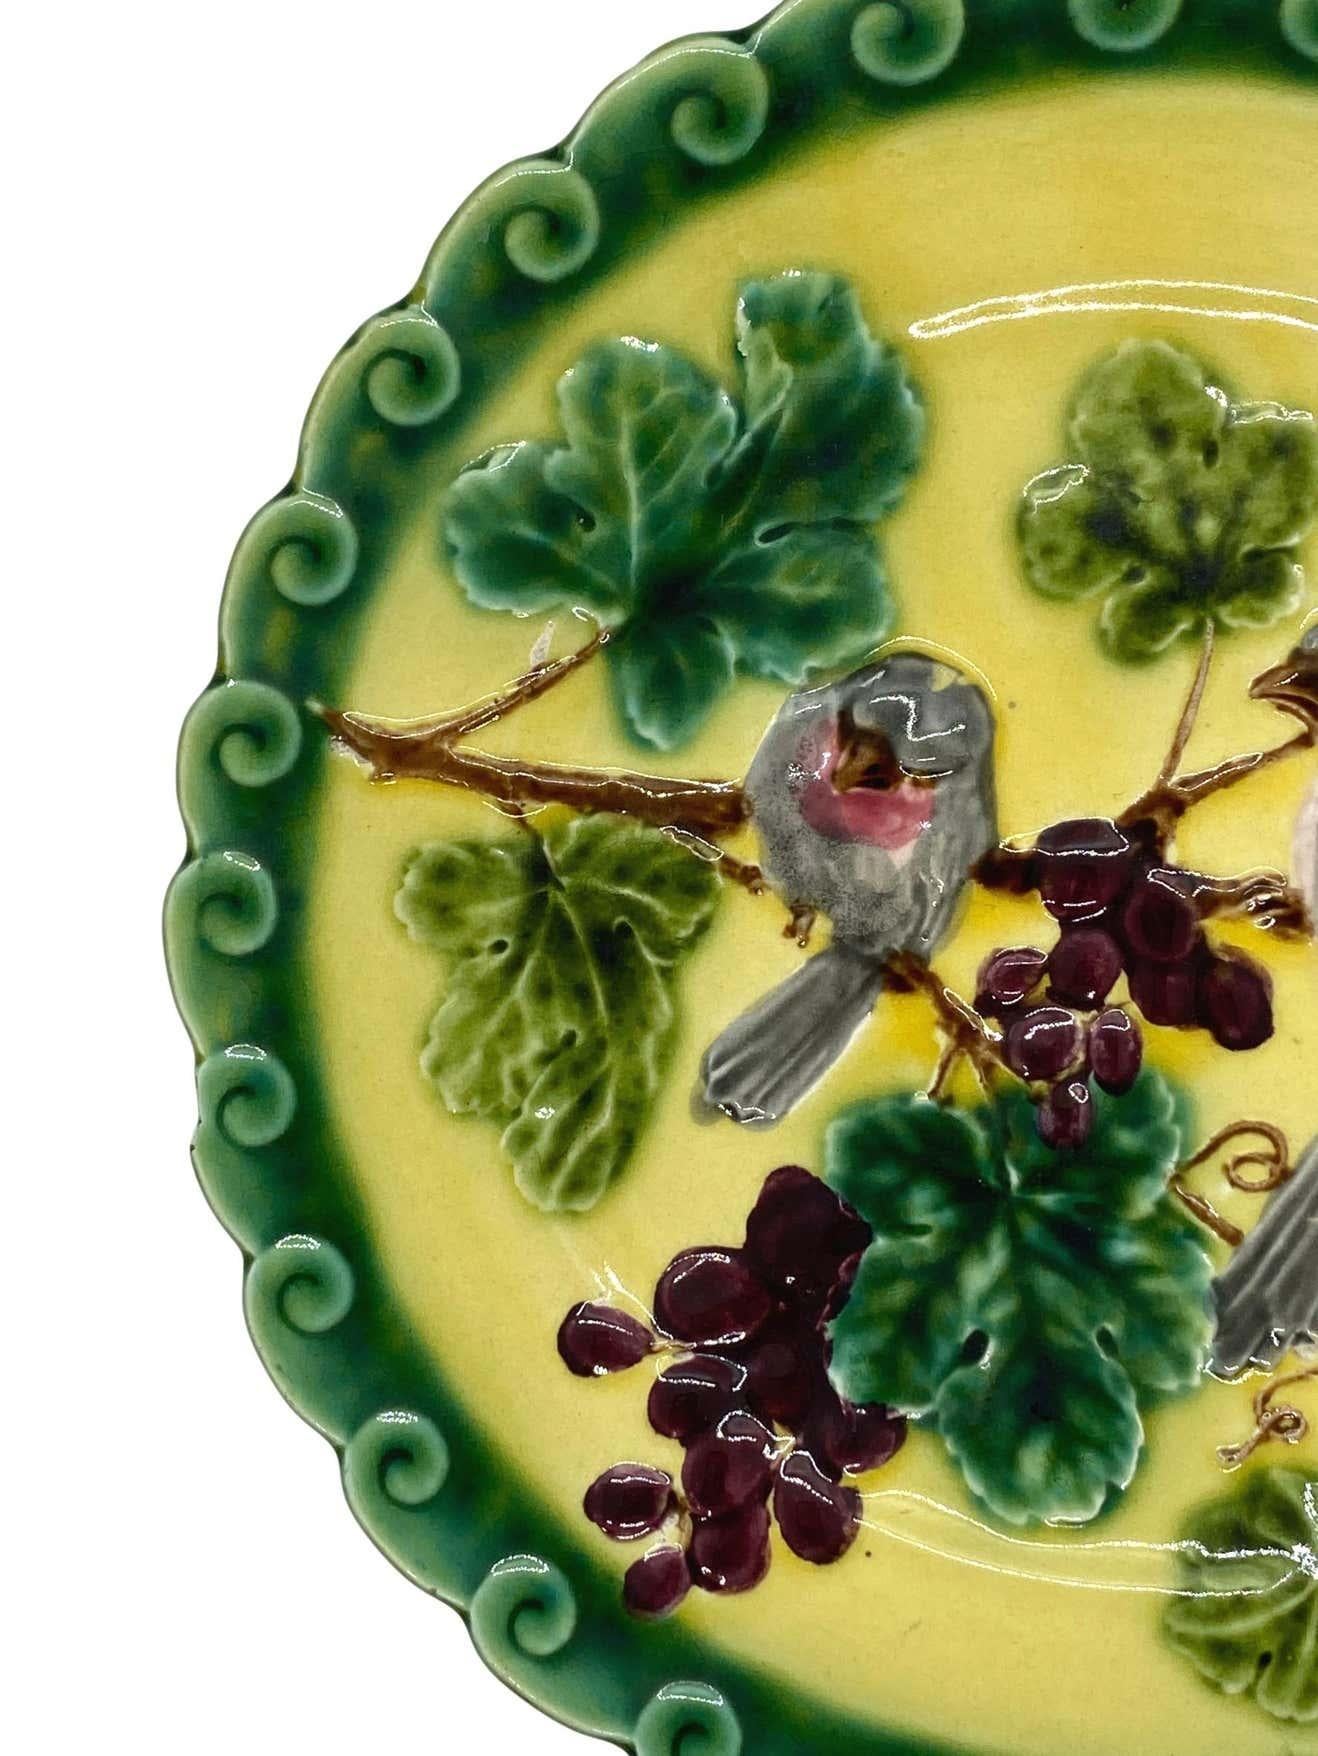 French Majolica (Barbotine) Trompe L'oeil plate, with two relief molded pink sparrows among purple grapes and green glazed leafy vines, on a yellow glazed ground, with a stylized rolling wave, scalloped and green glazed border, the reverse with